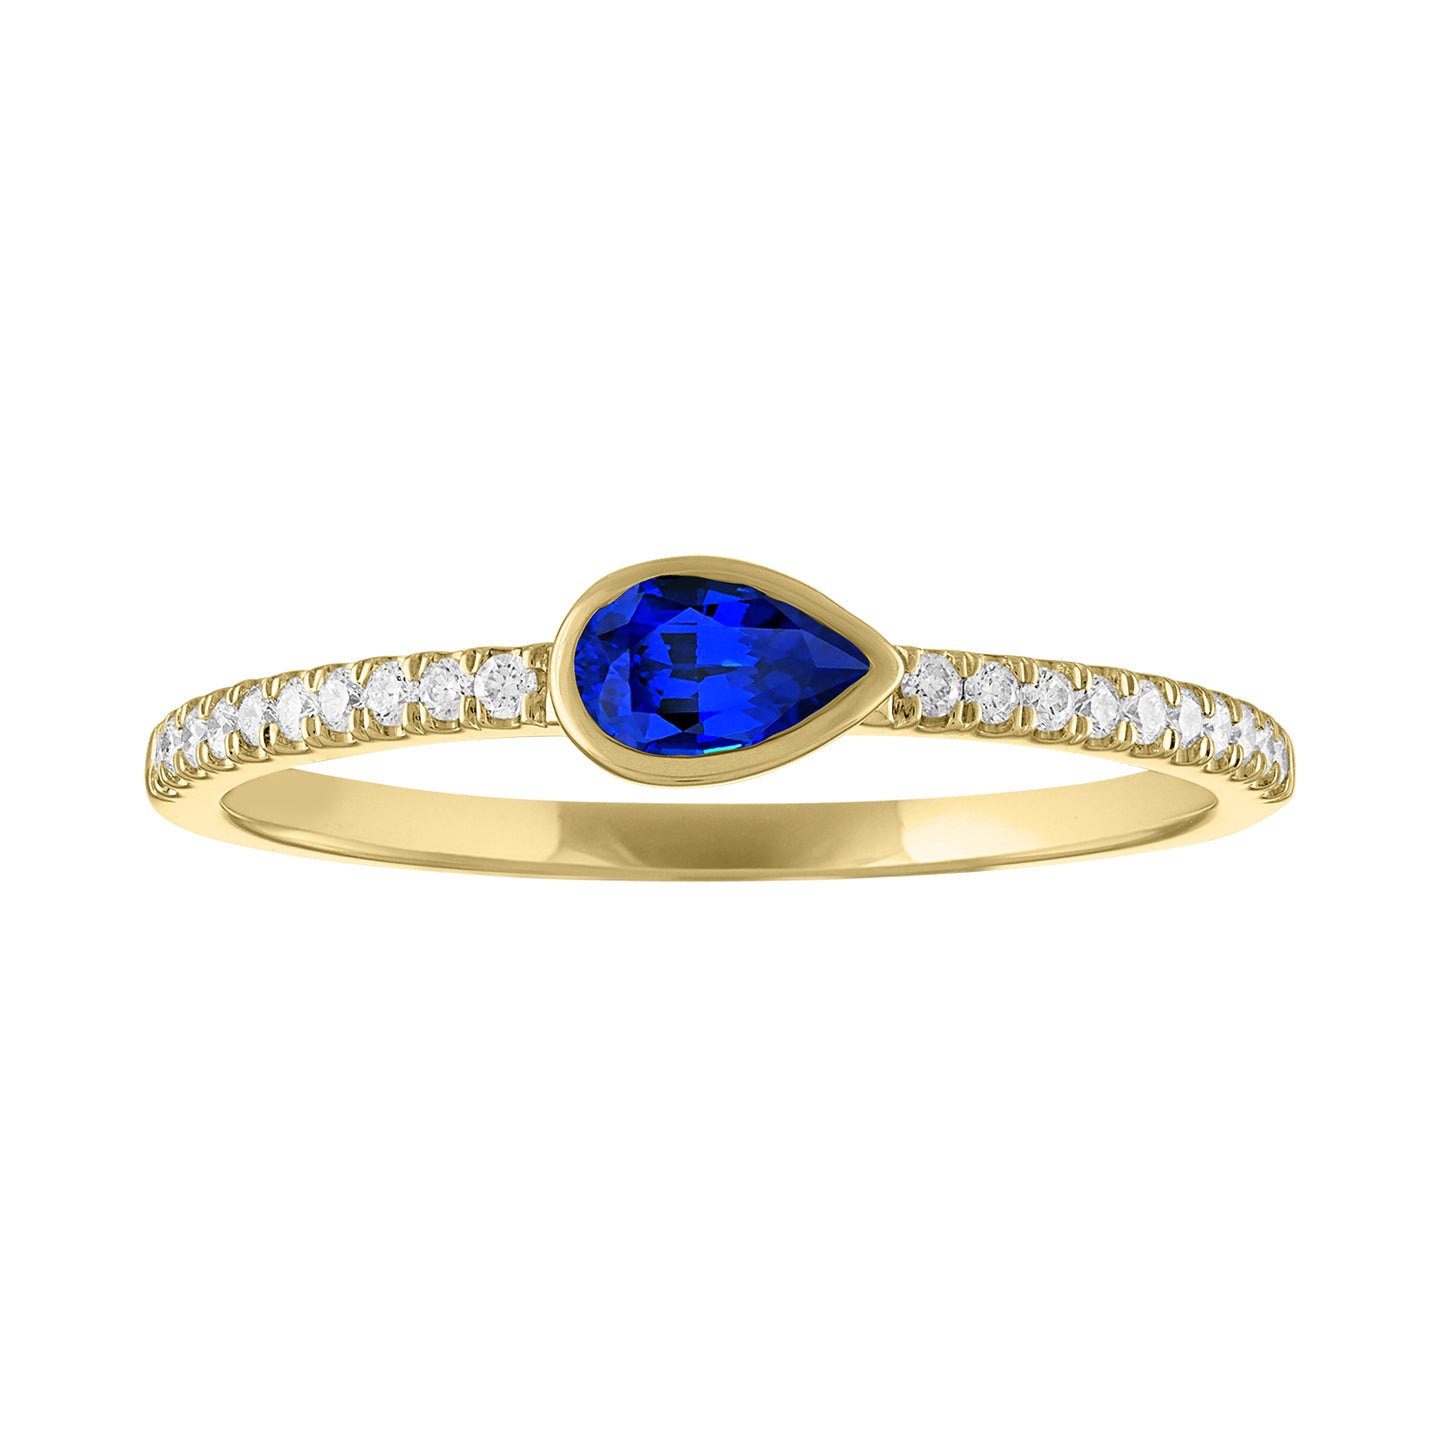 Yellow gold skinny band with a bezeled pear shape sapphire in the center and round diamonds on the shank. 